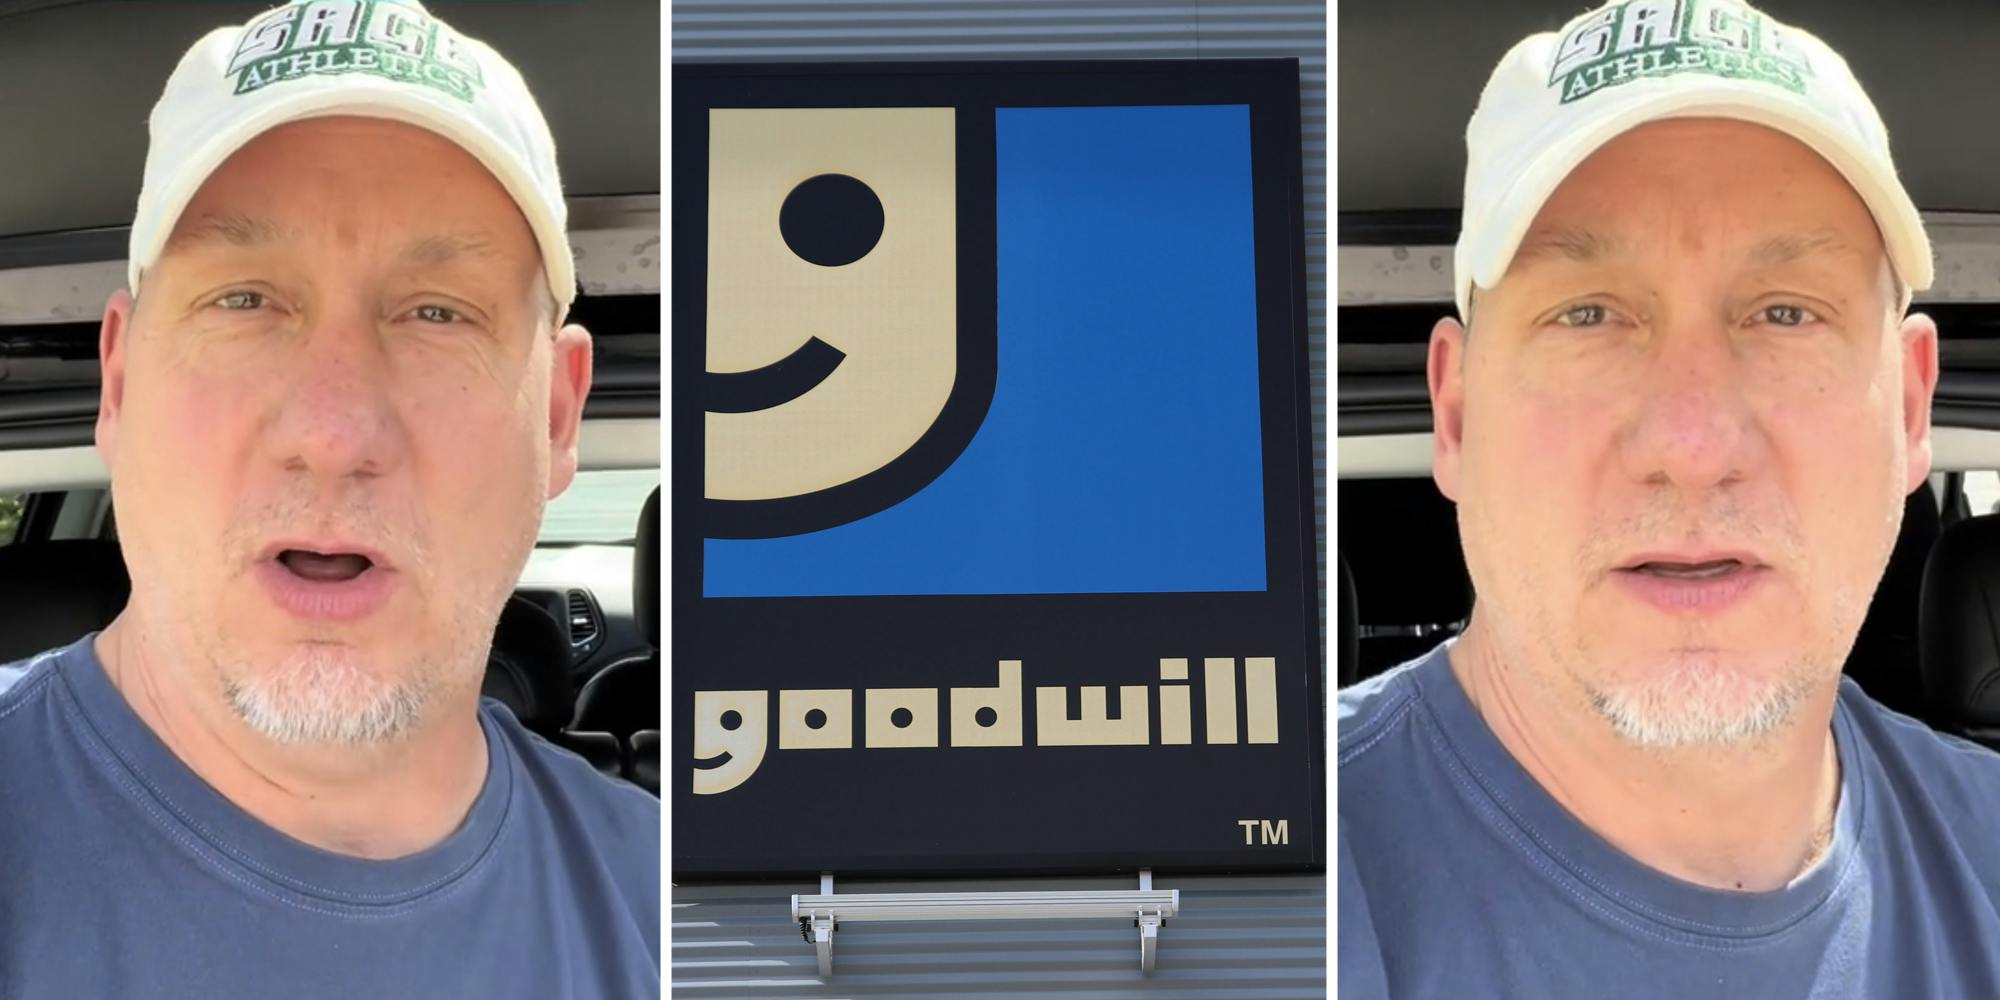 ‘That explains why I never see Legos’: Man says he caught Goodwill workers reselling the best items on eBay